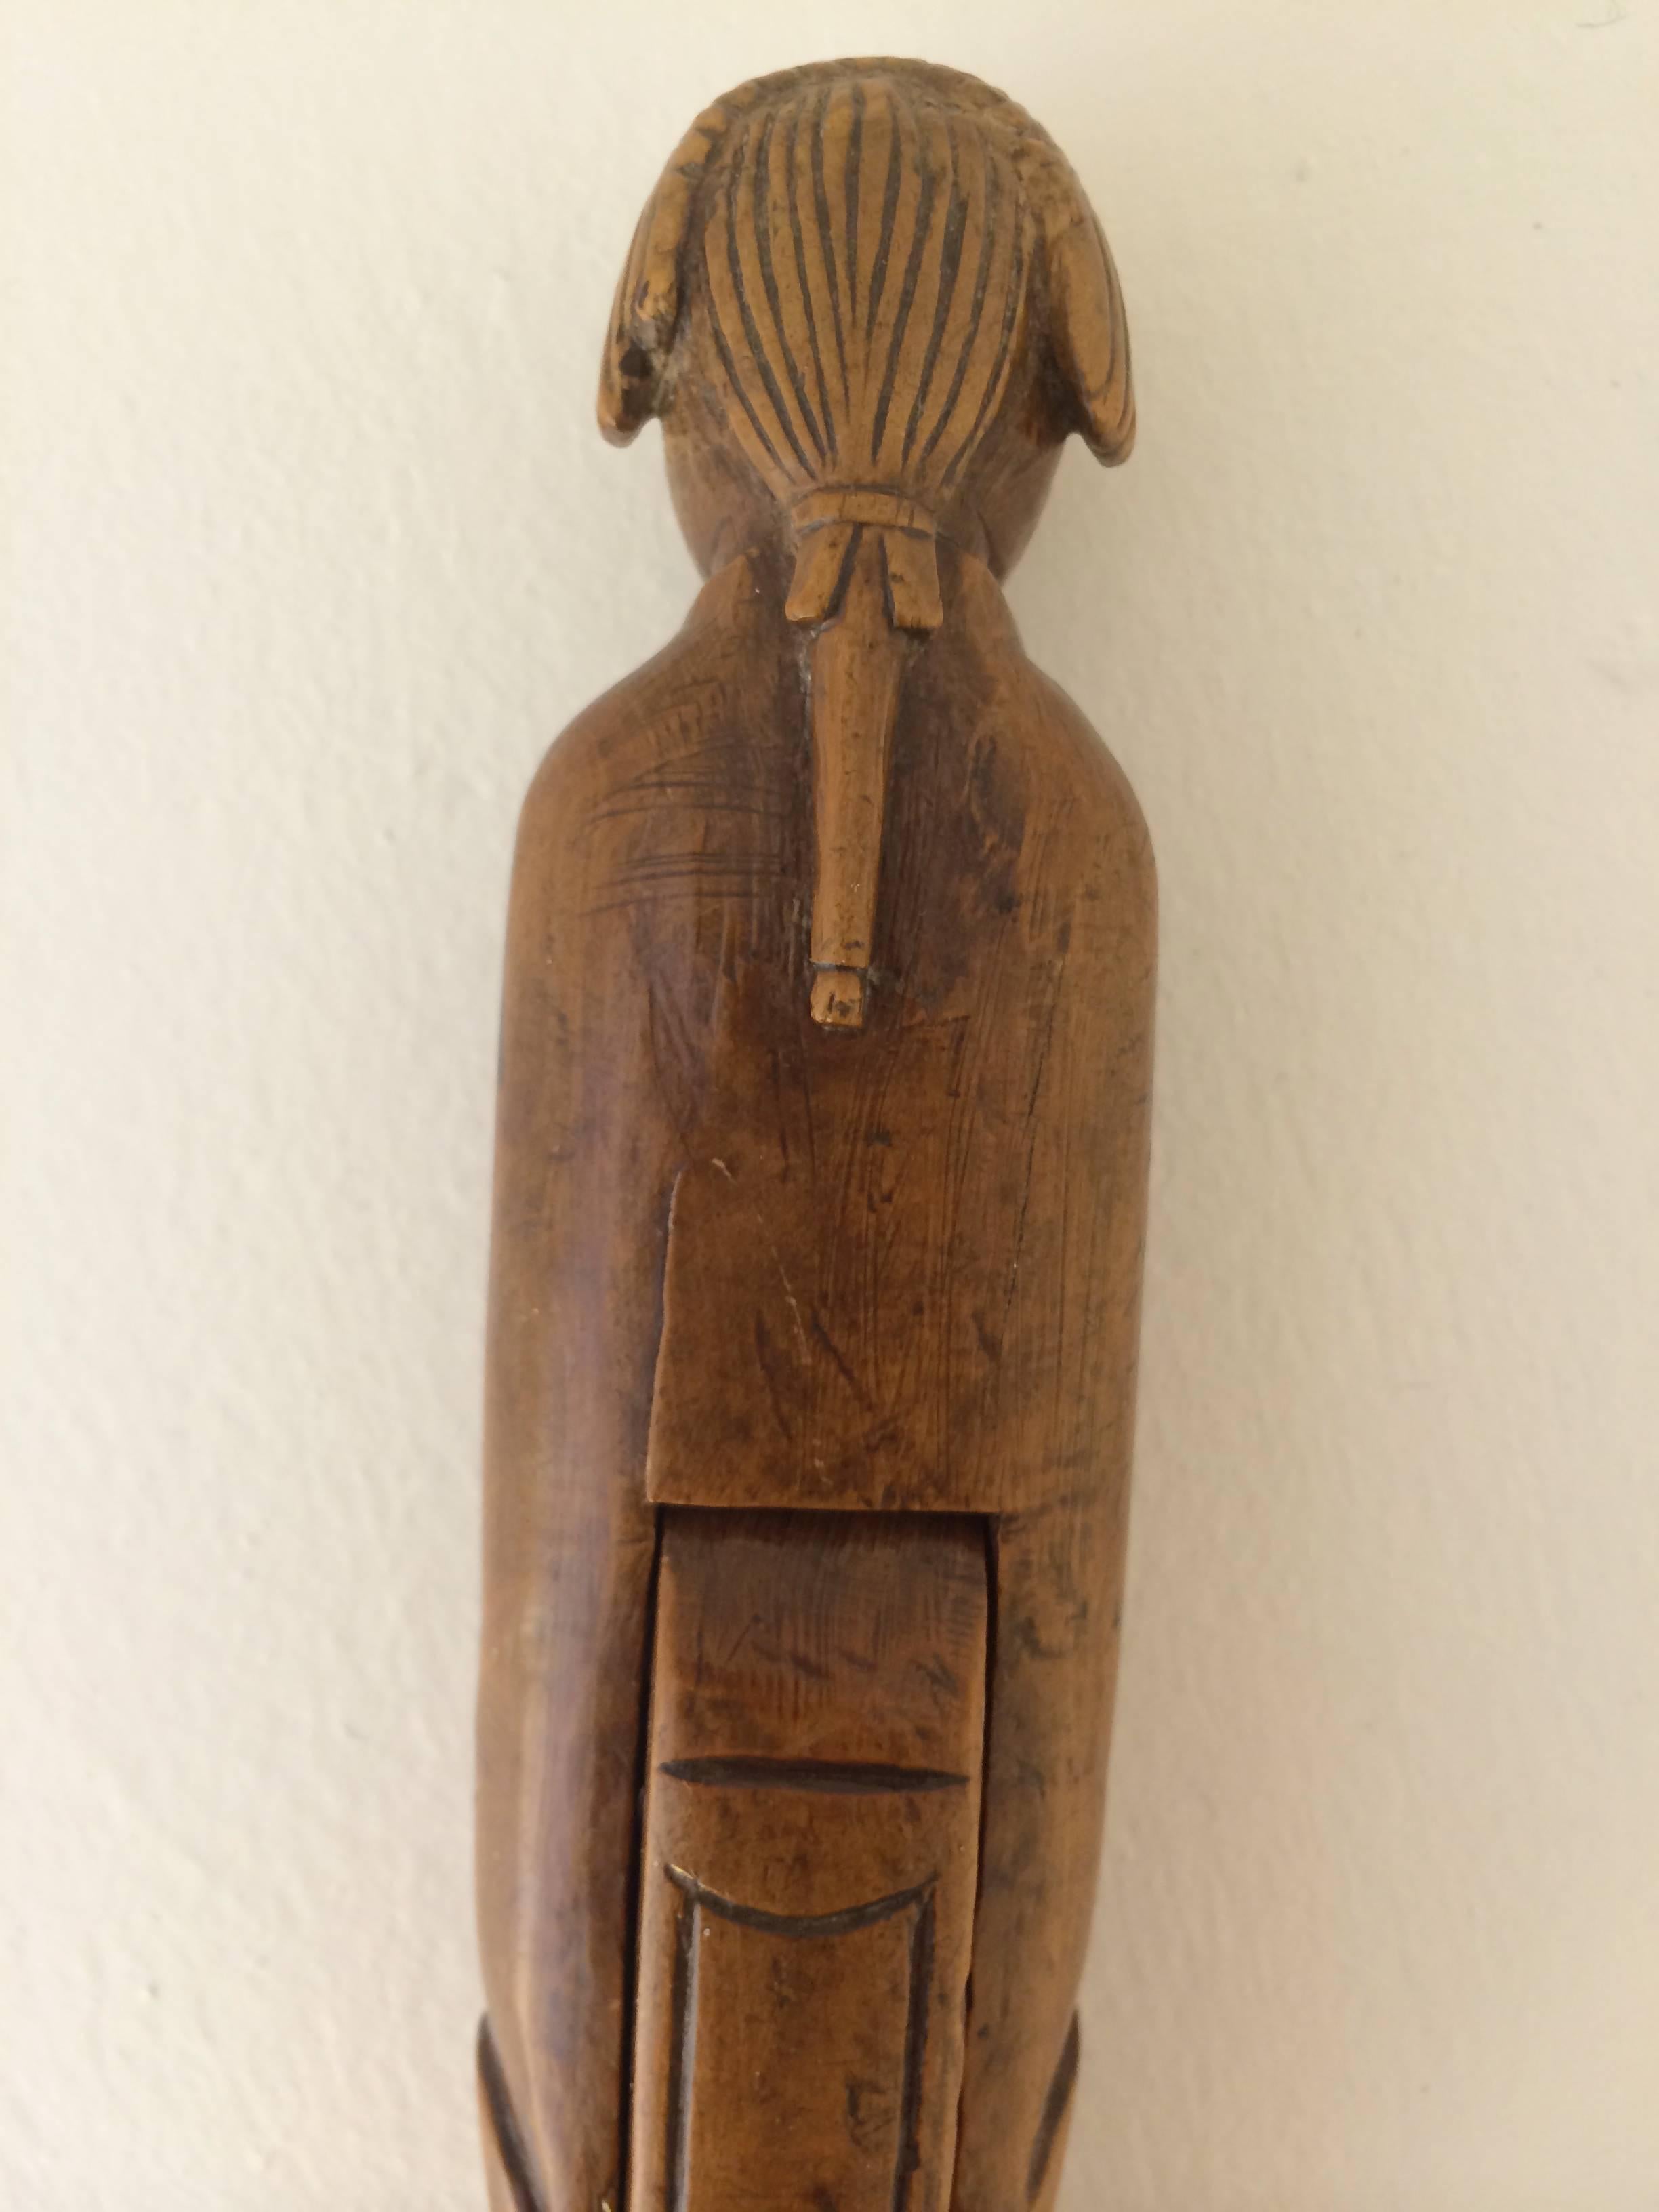 Carved 18th Century Man with Wig Lever Nutcracker for Hazelnuts